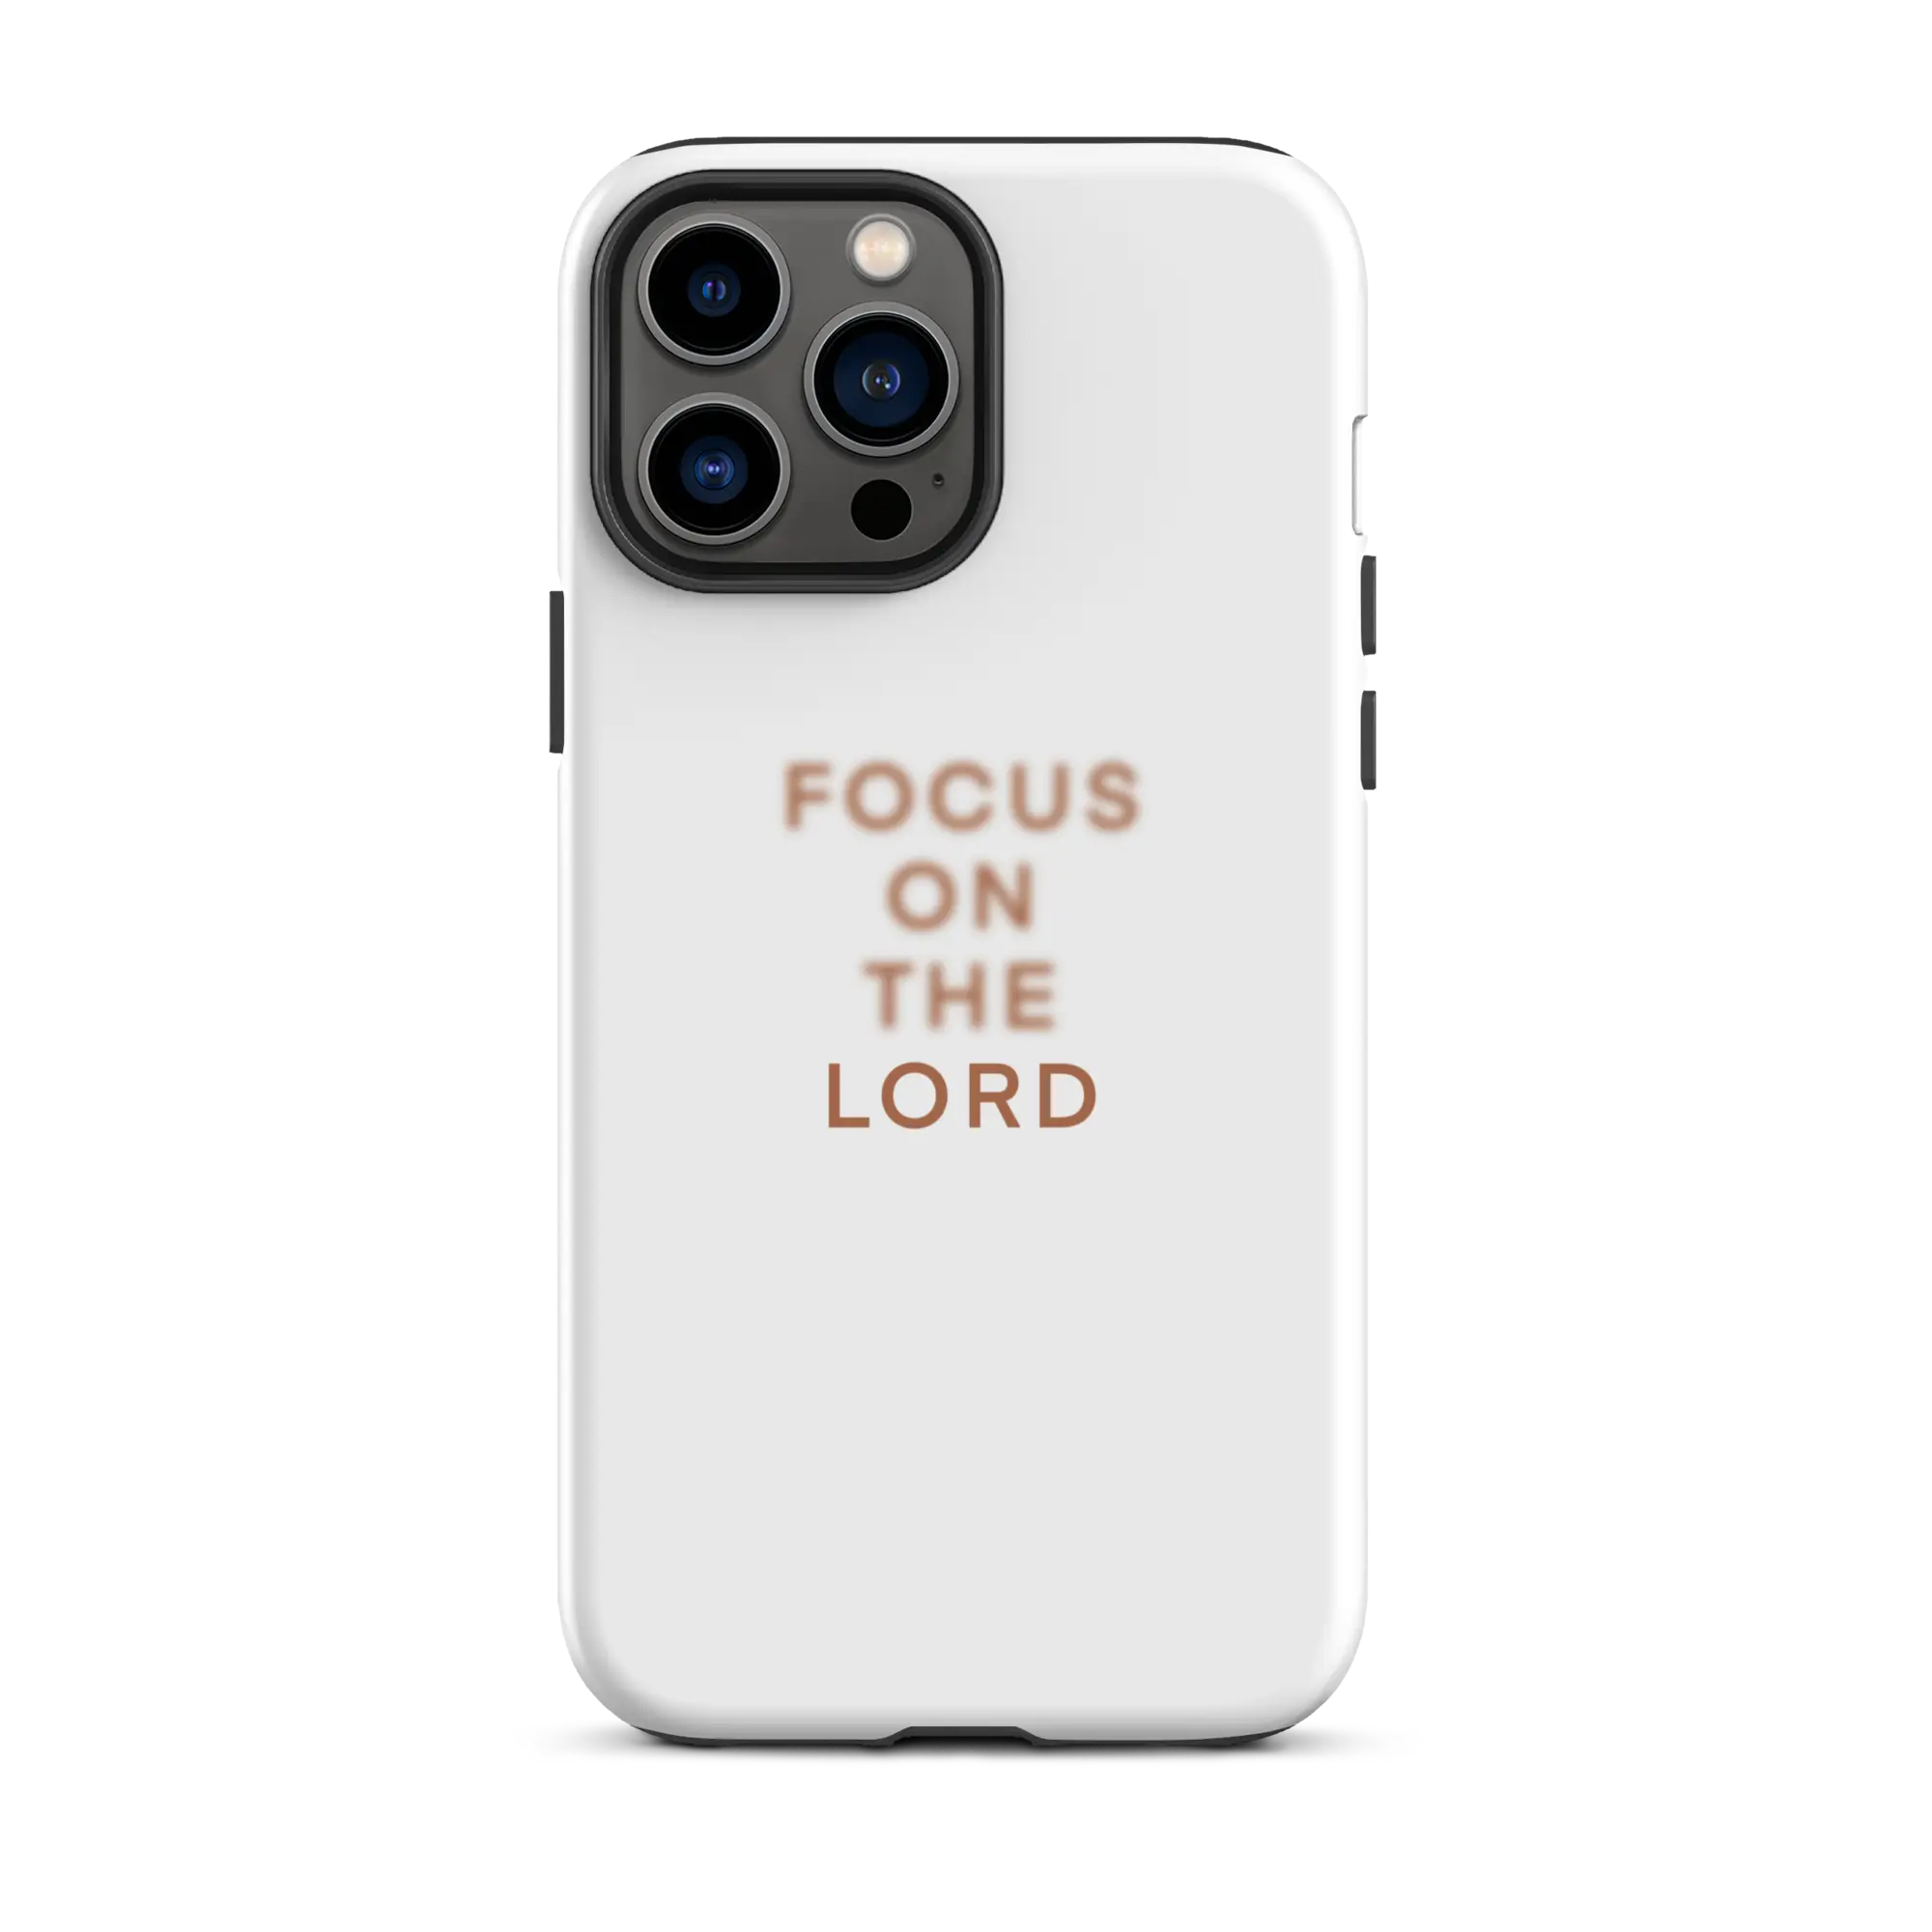 Elegant iPhone case with the phrase 'FOCUS ON THE LORD' in subtle lettering, a daily faith reminder for Christians.